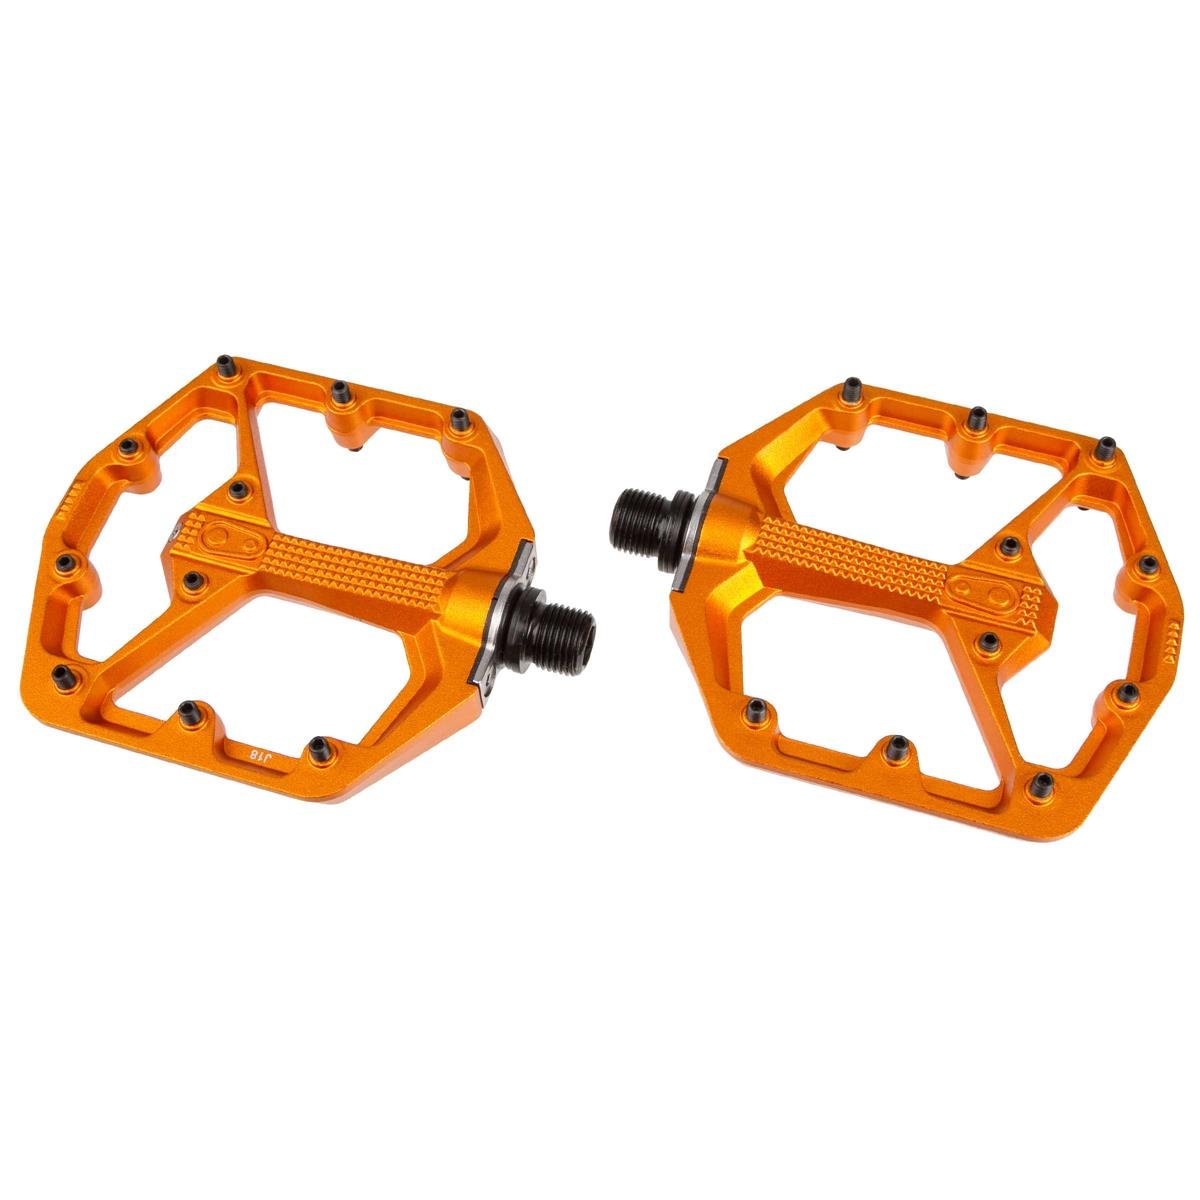 Crankbrothers Pedale Stamp 7 Limited Edition, Orange, Small